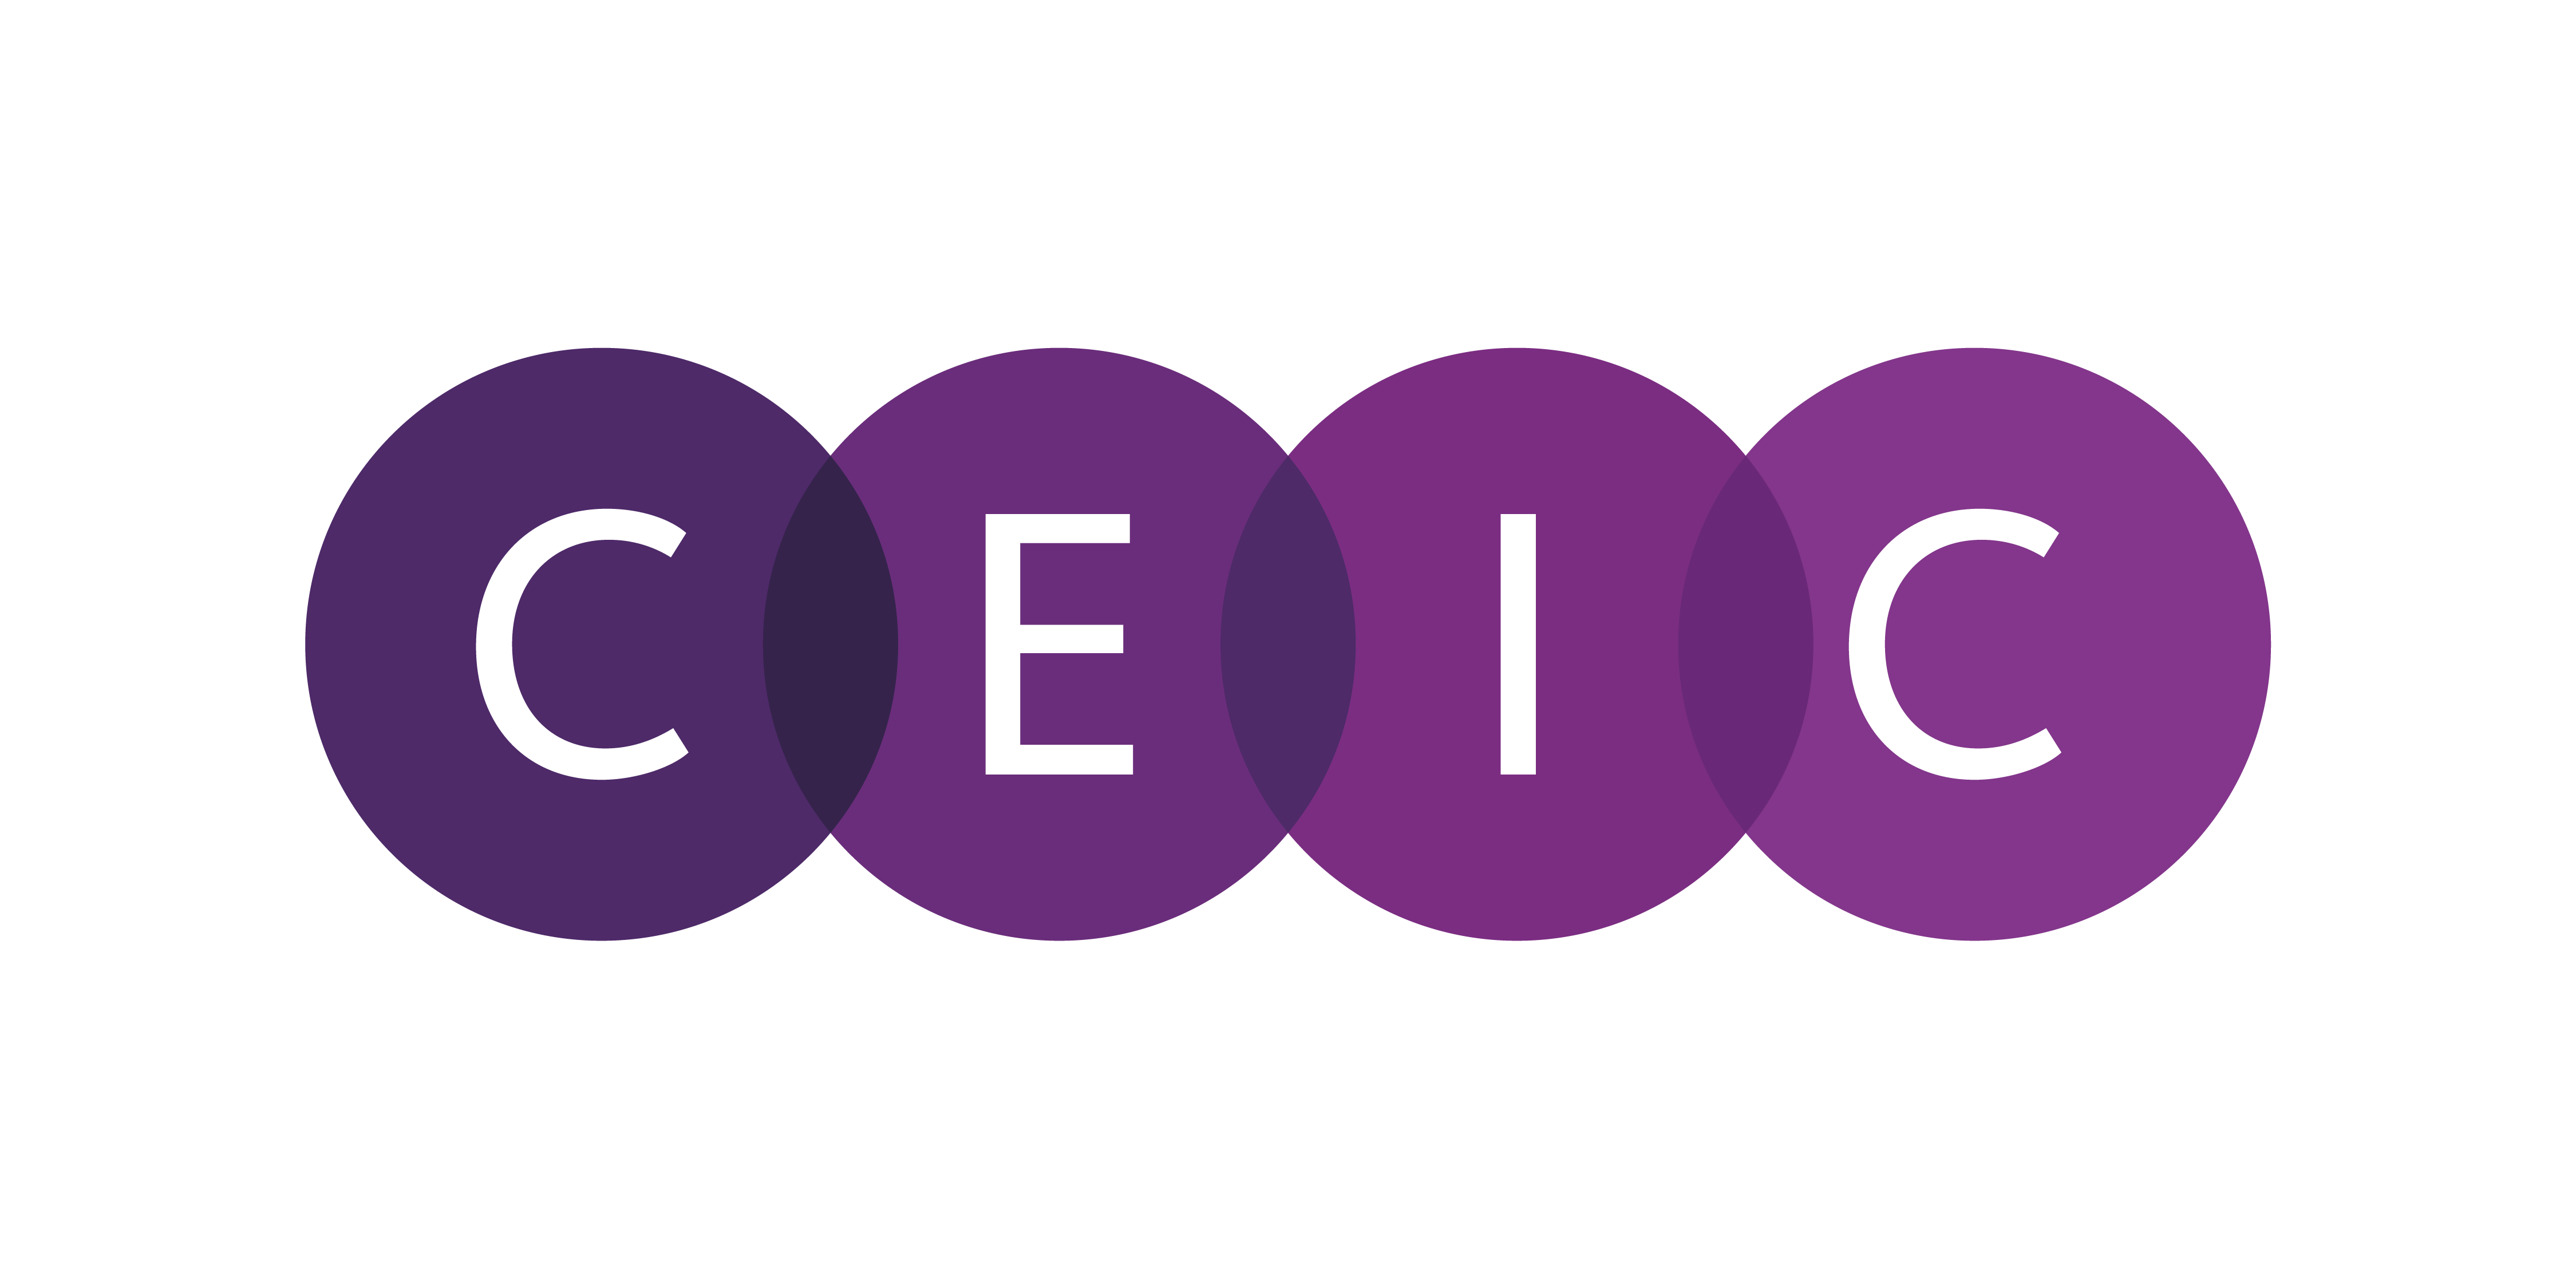 Image containing CEIC's logo